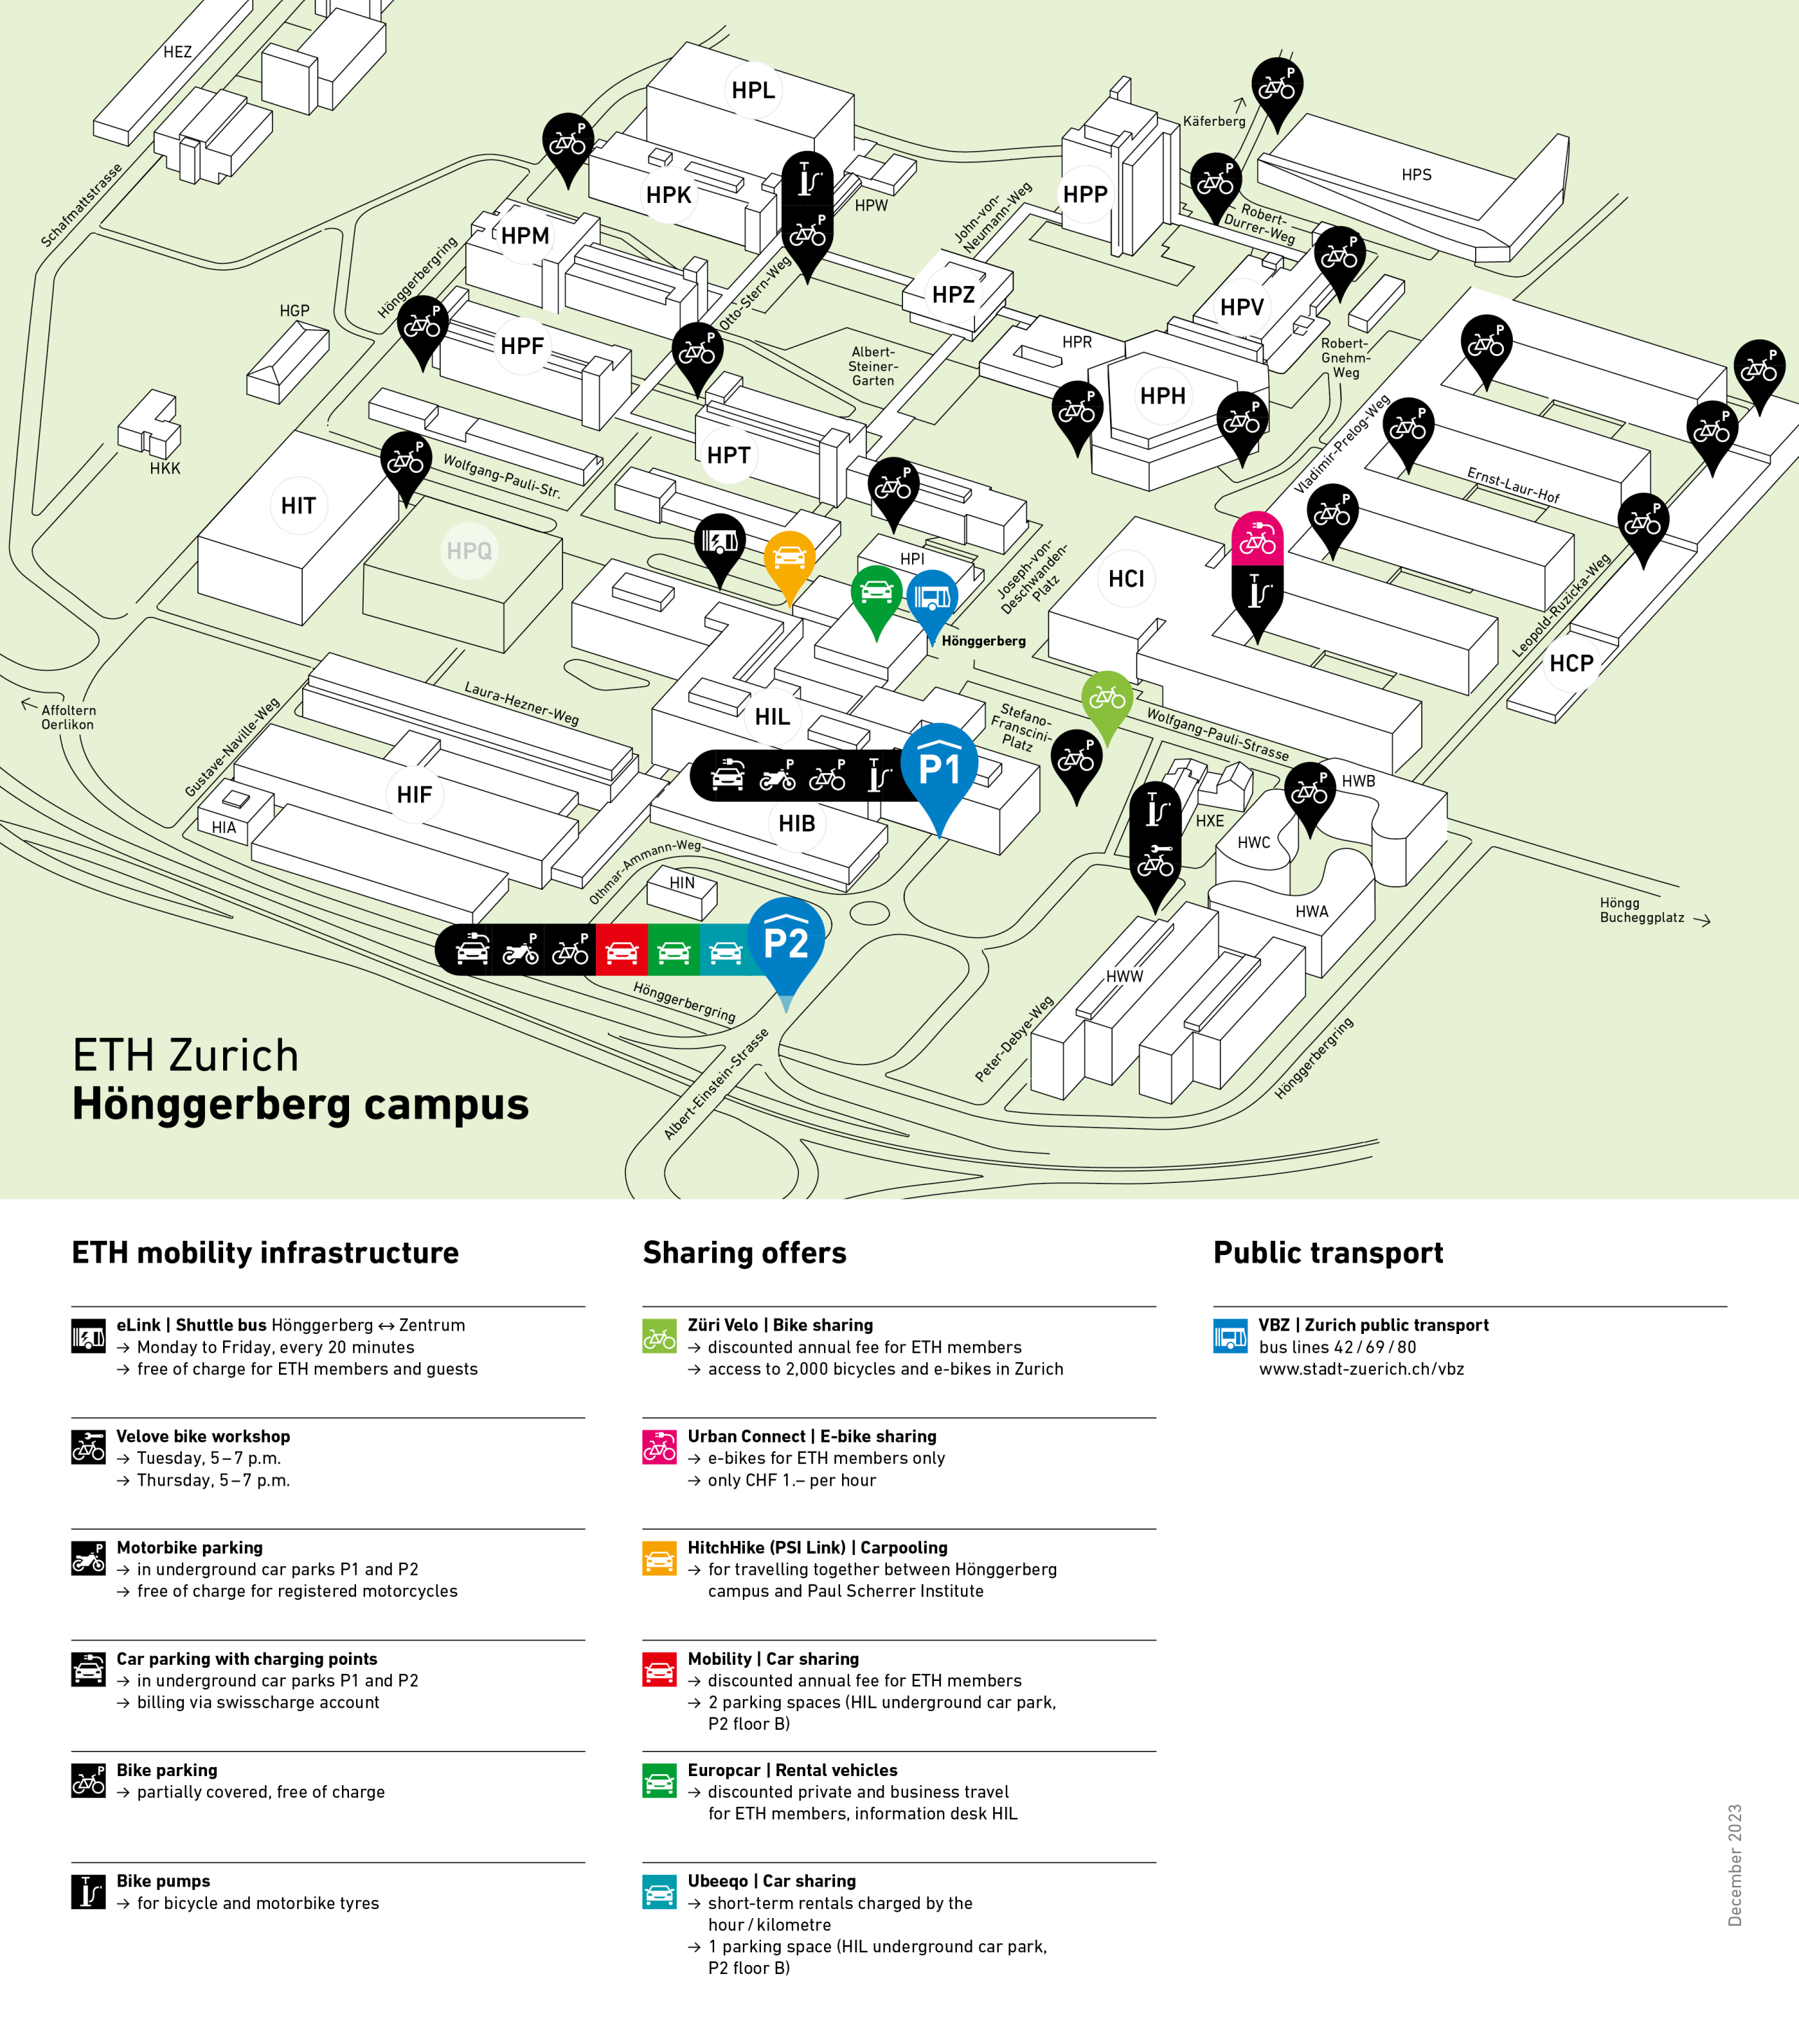 Enlarged view: Locations of ETH mobility services on the Hönggerberg campus